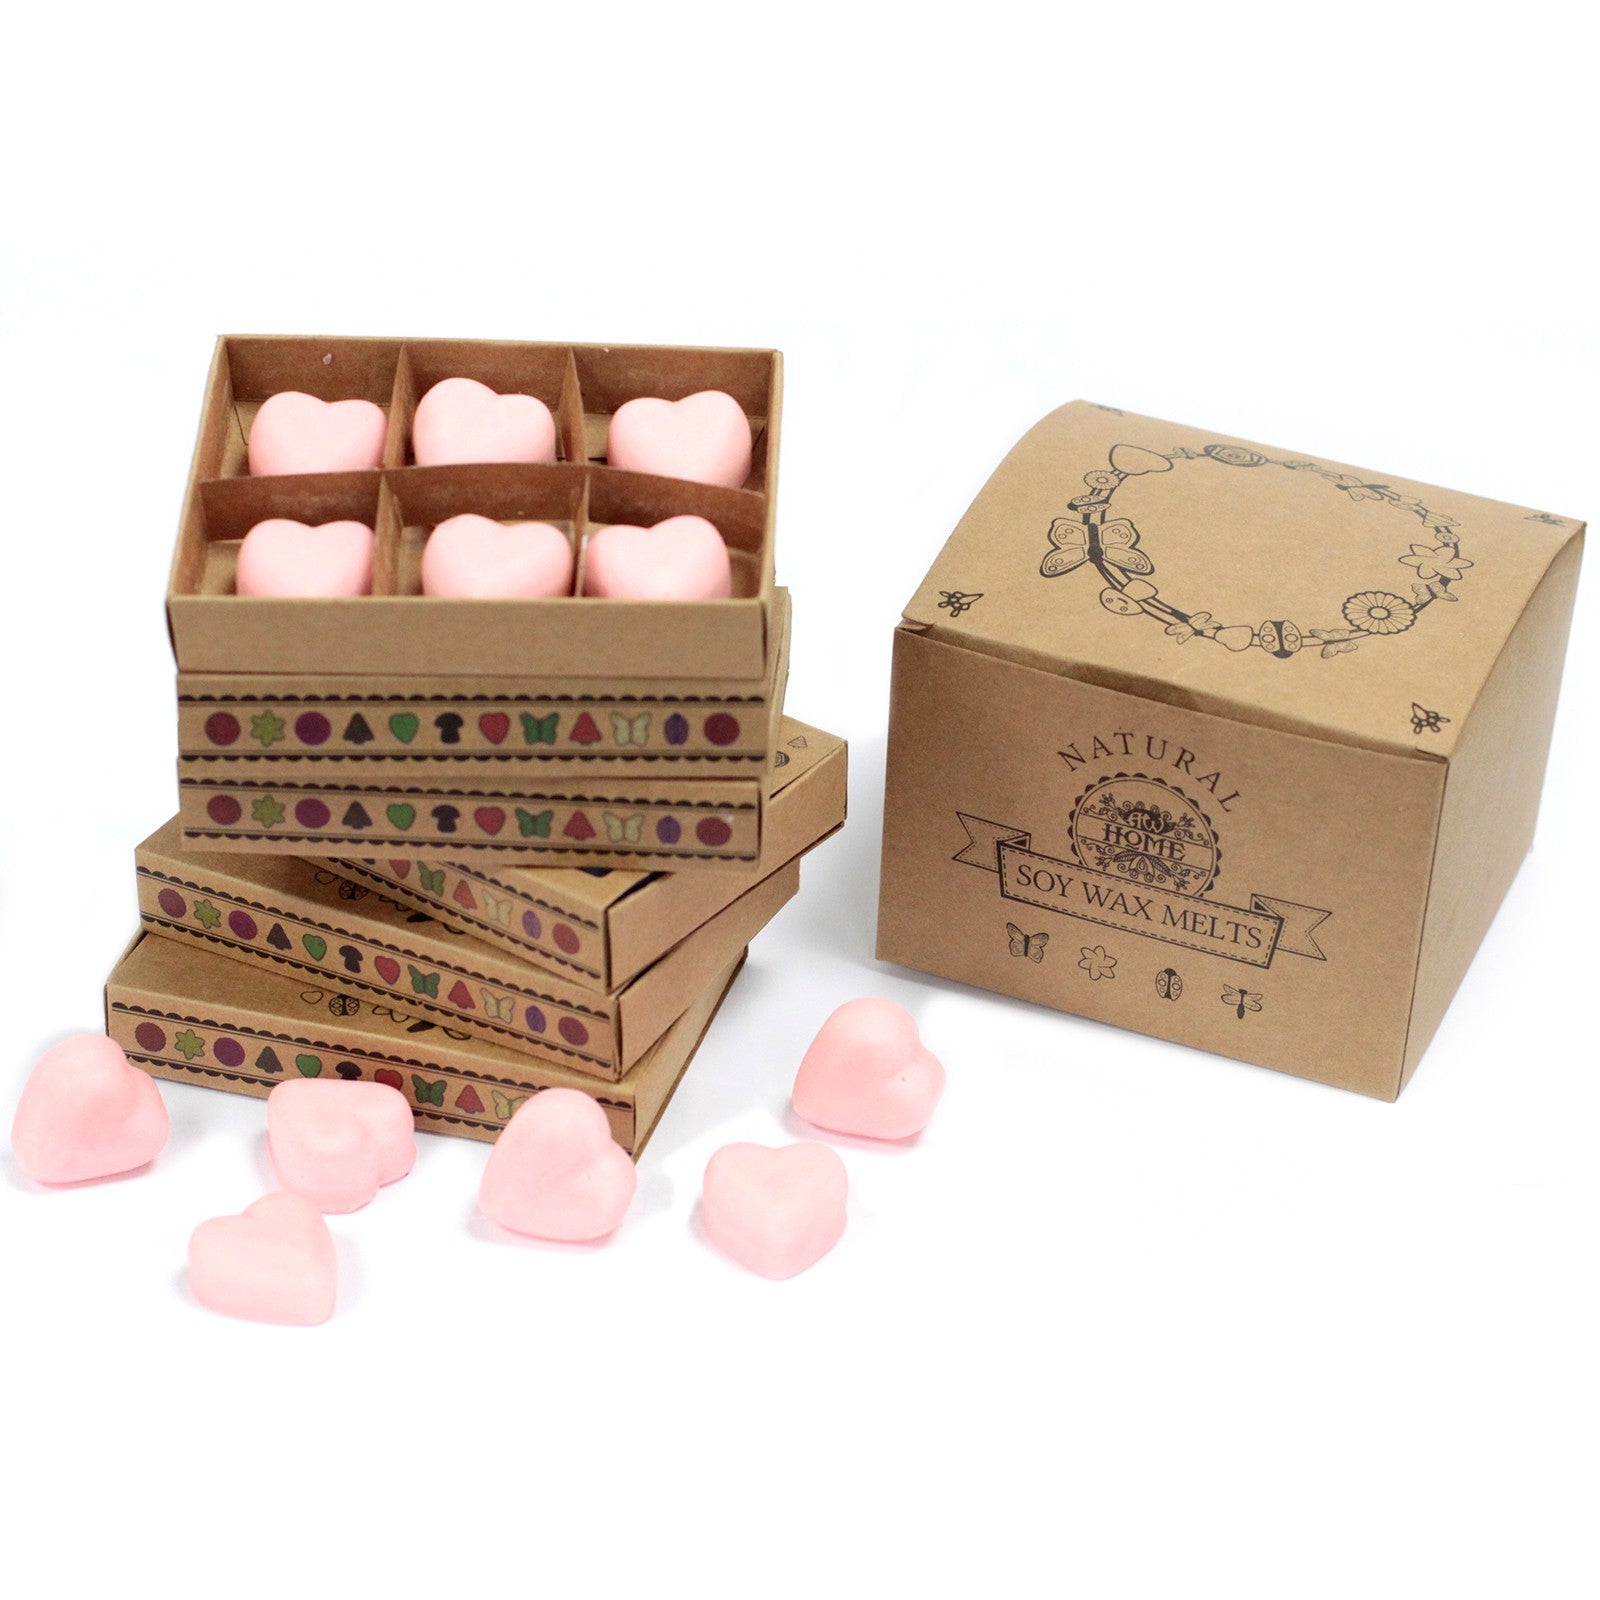 View Box of 6 Wax Melts Dragons Blood information